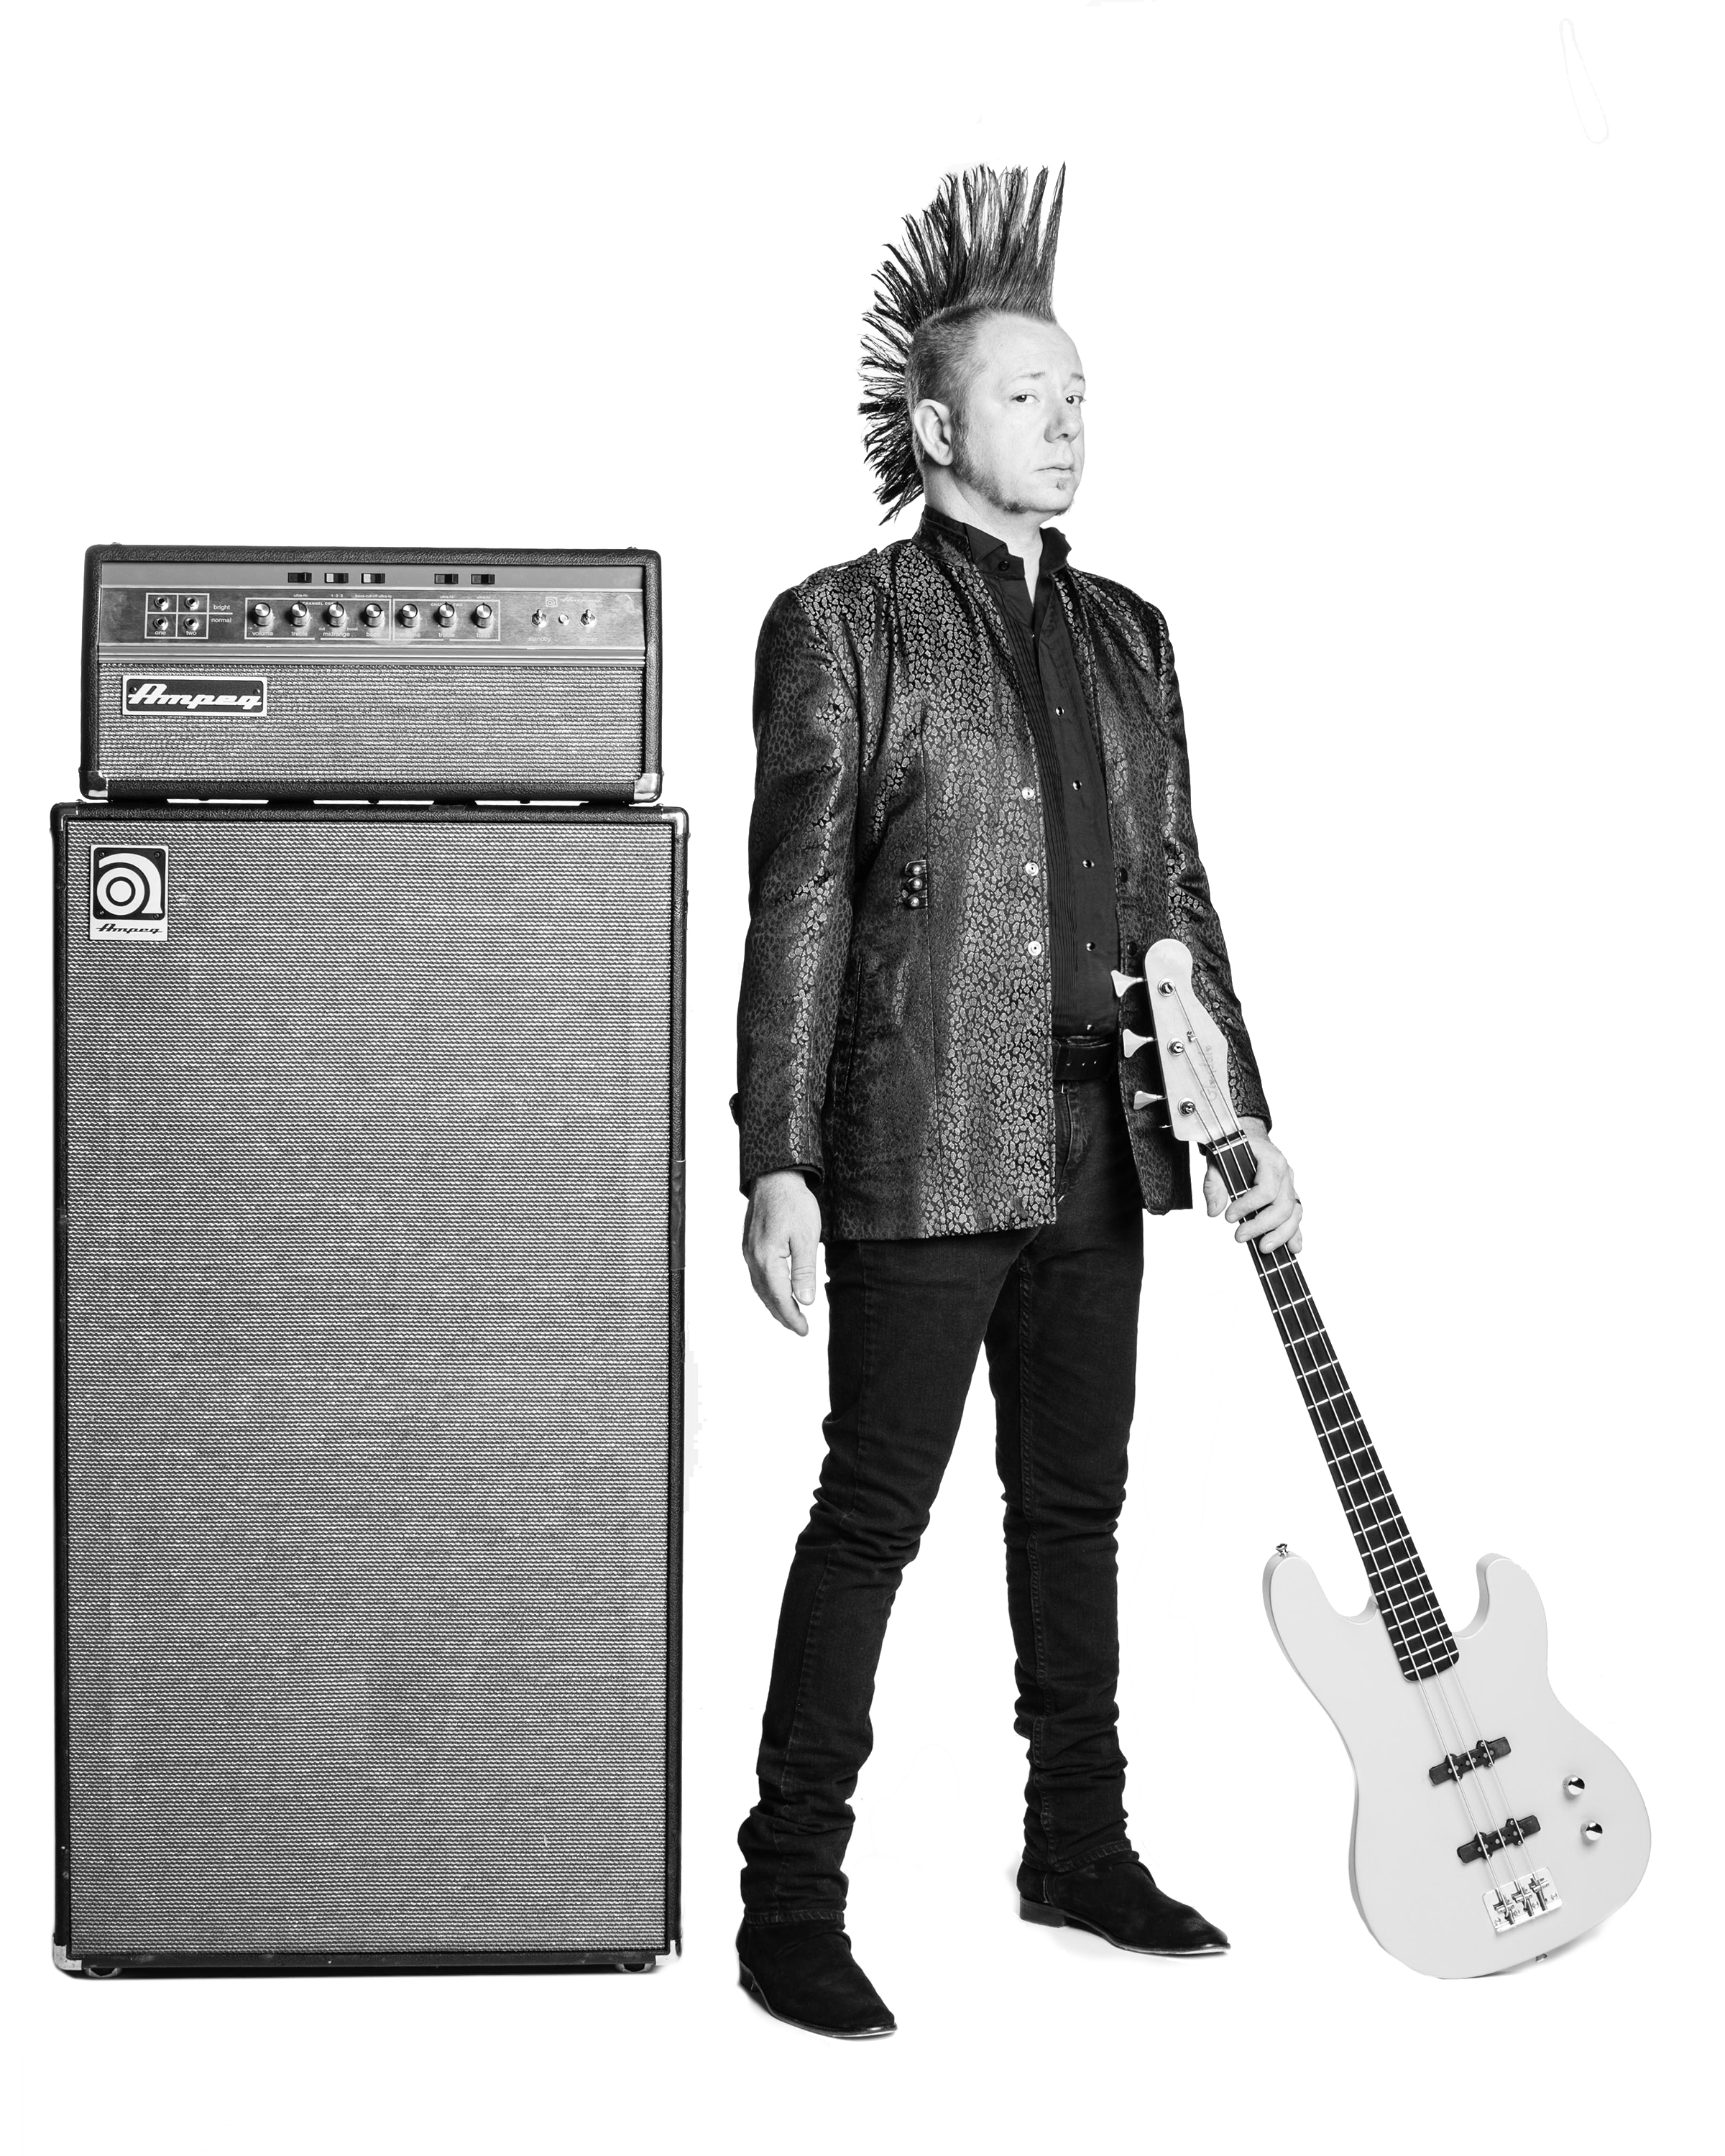 Aden Bubeck standing by an Ampeg SVT-VR stack with bass in hand